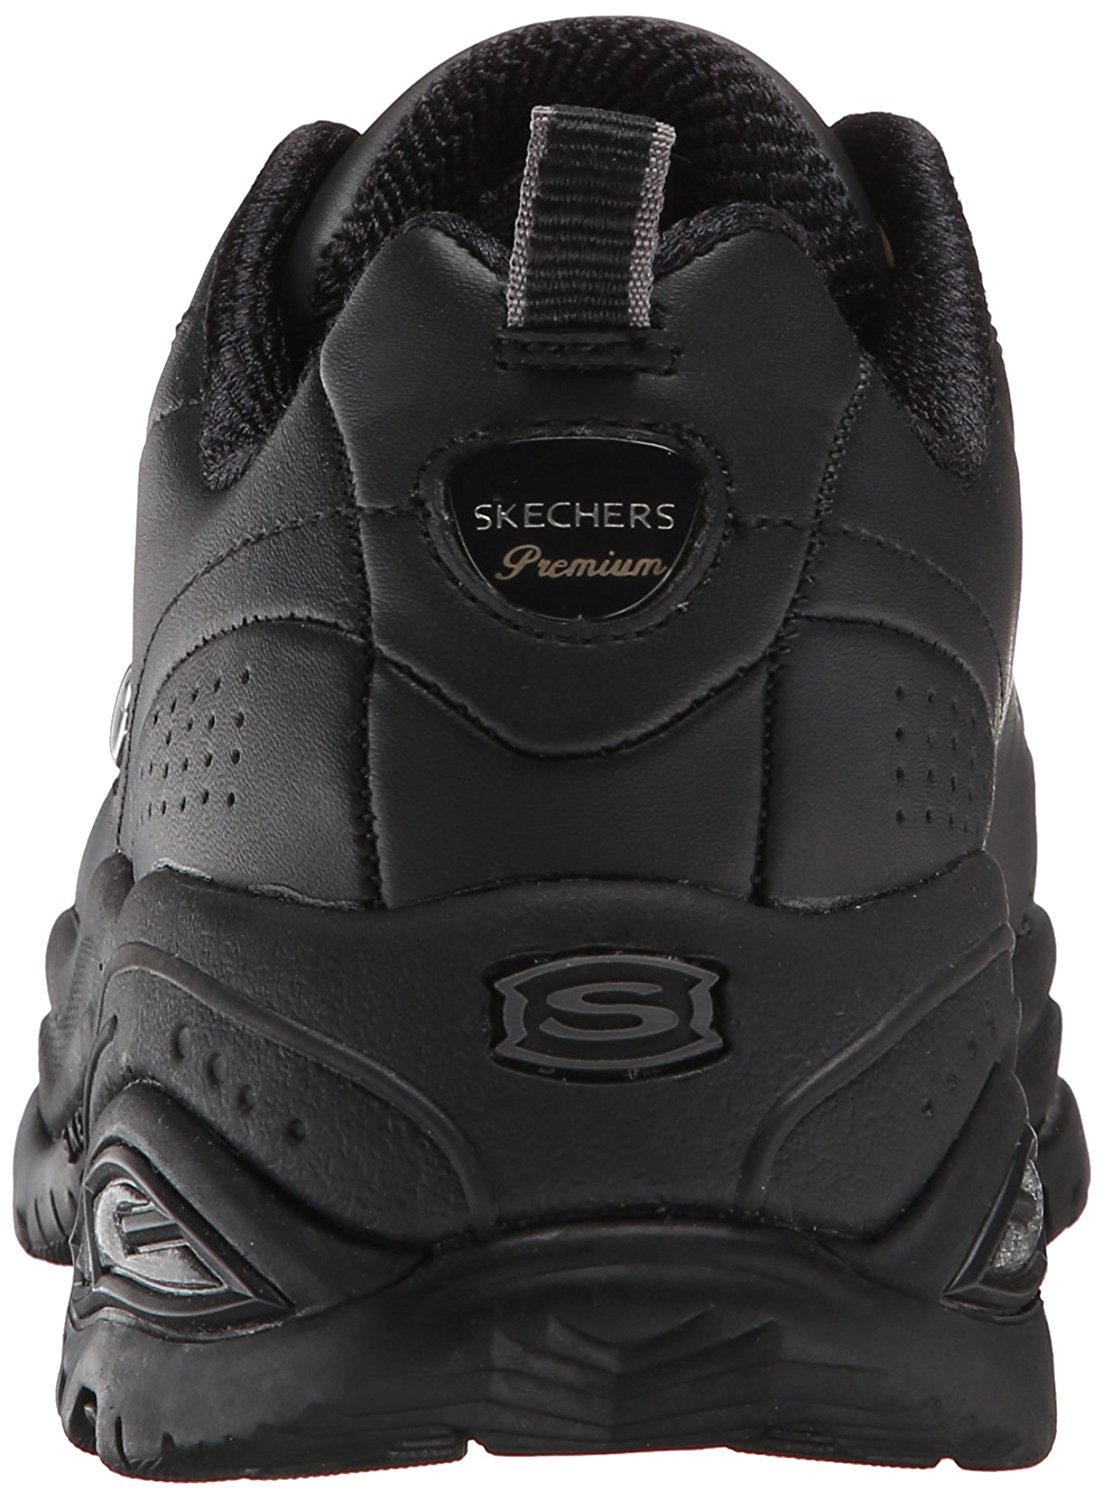 Skechers Womens 1728wnv Low Top Lace Up Walking Shoes, Black, Size 8.0 ...